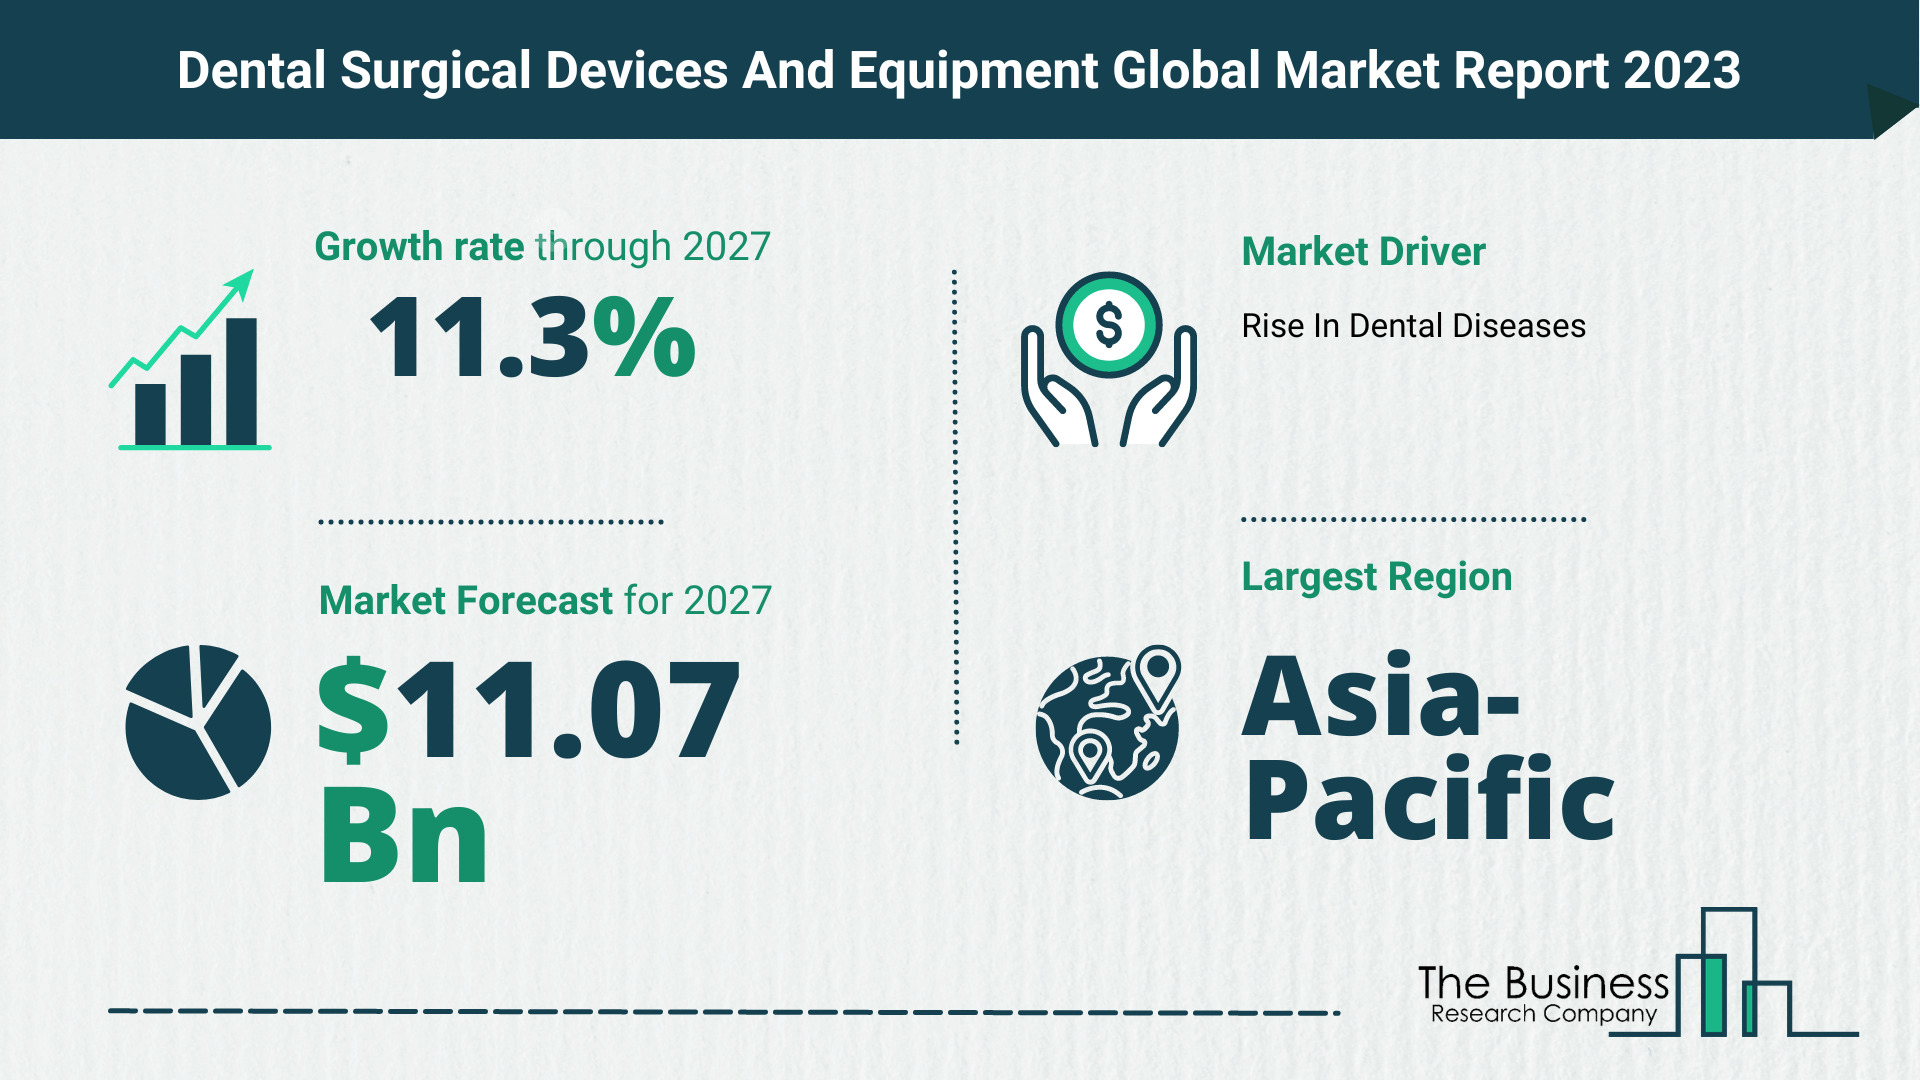 Global Dental Surgical Devices And Equipment Market